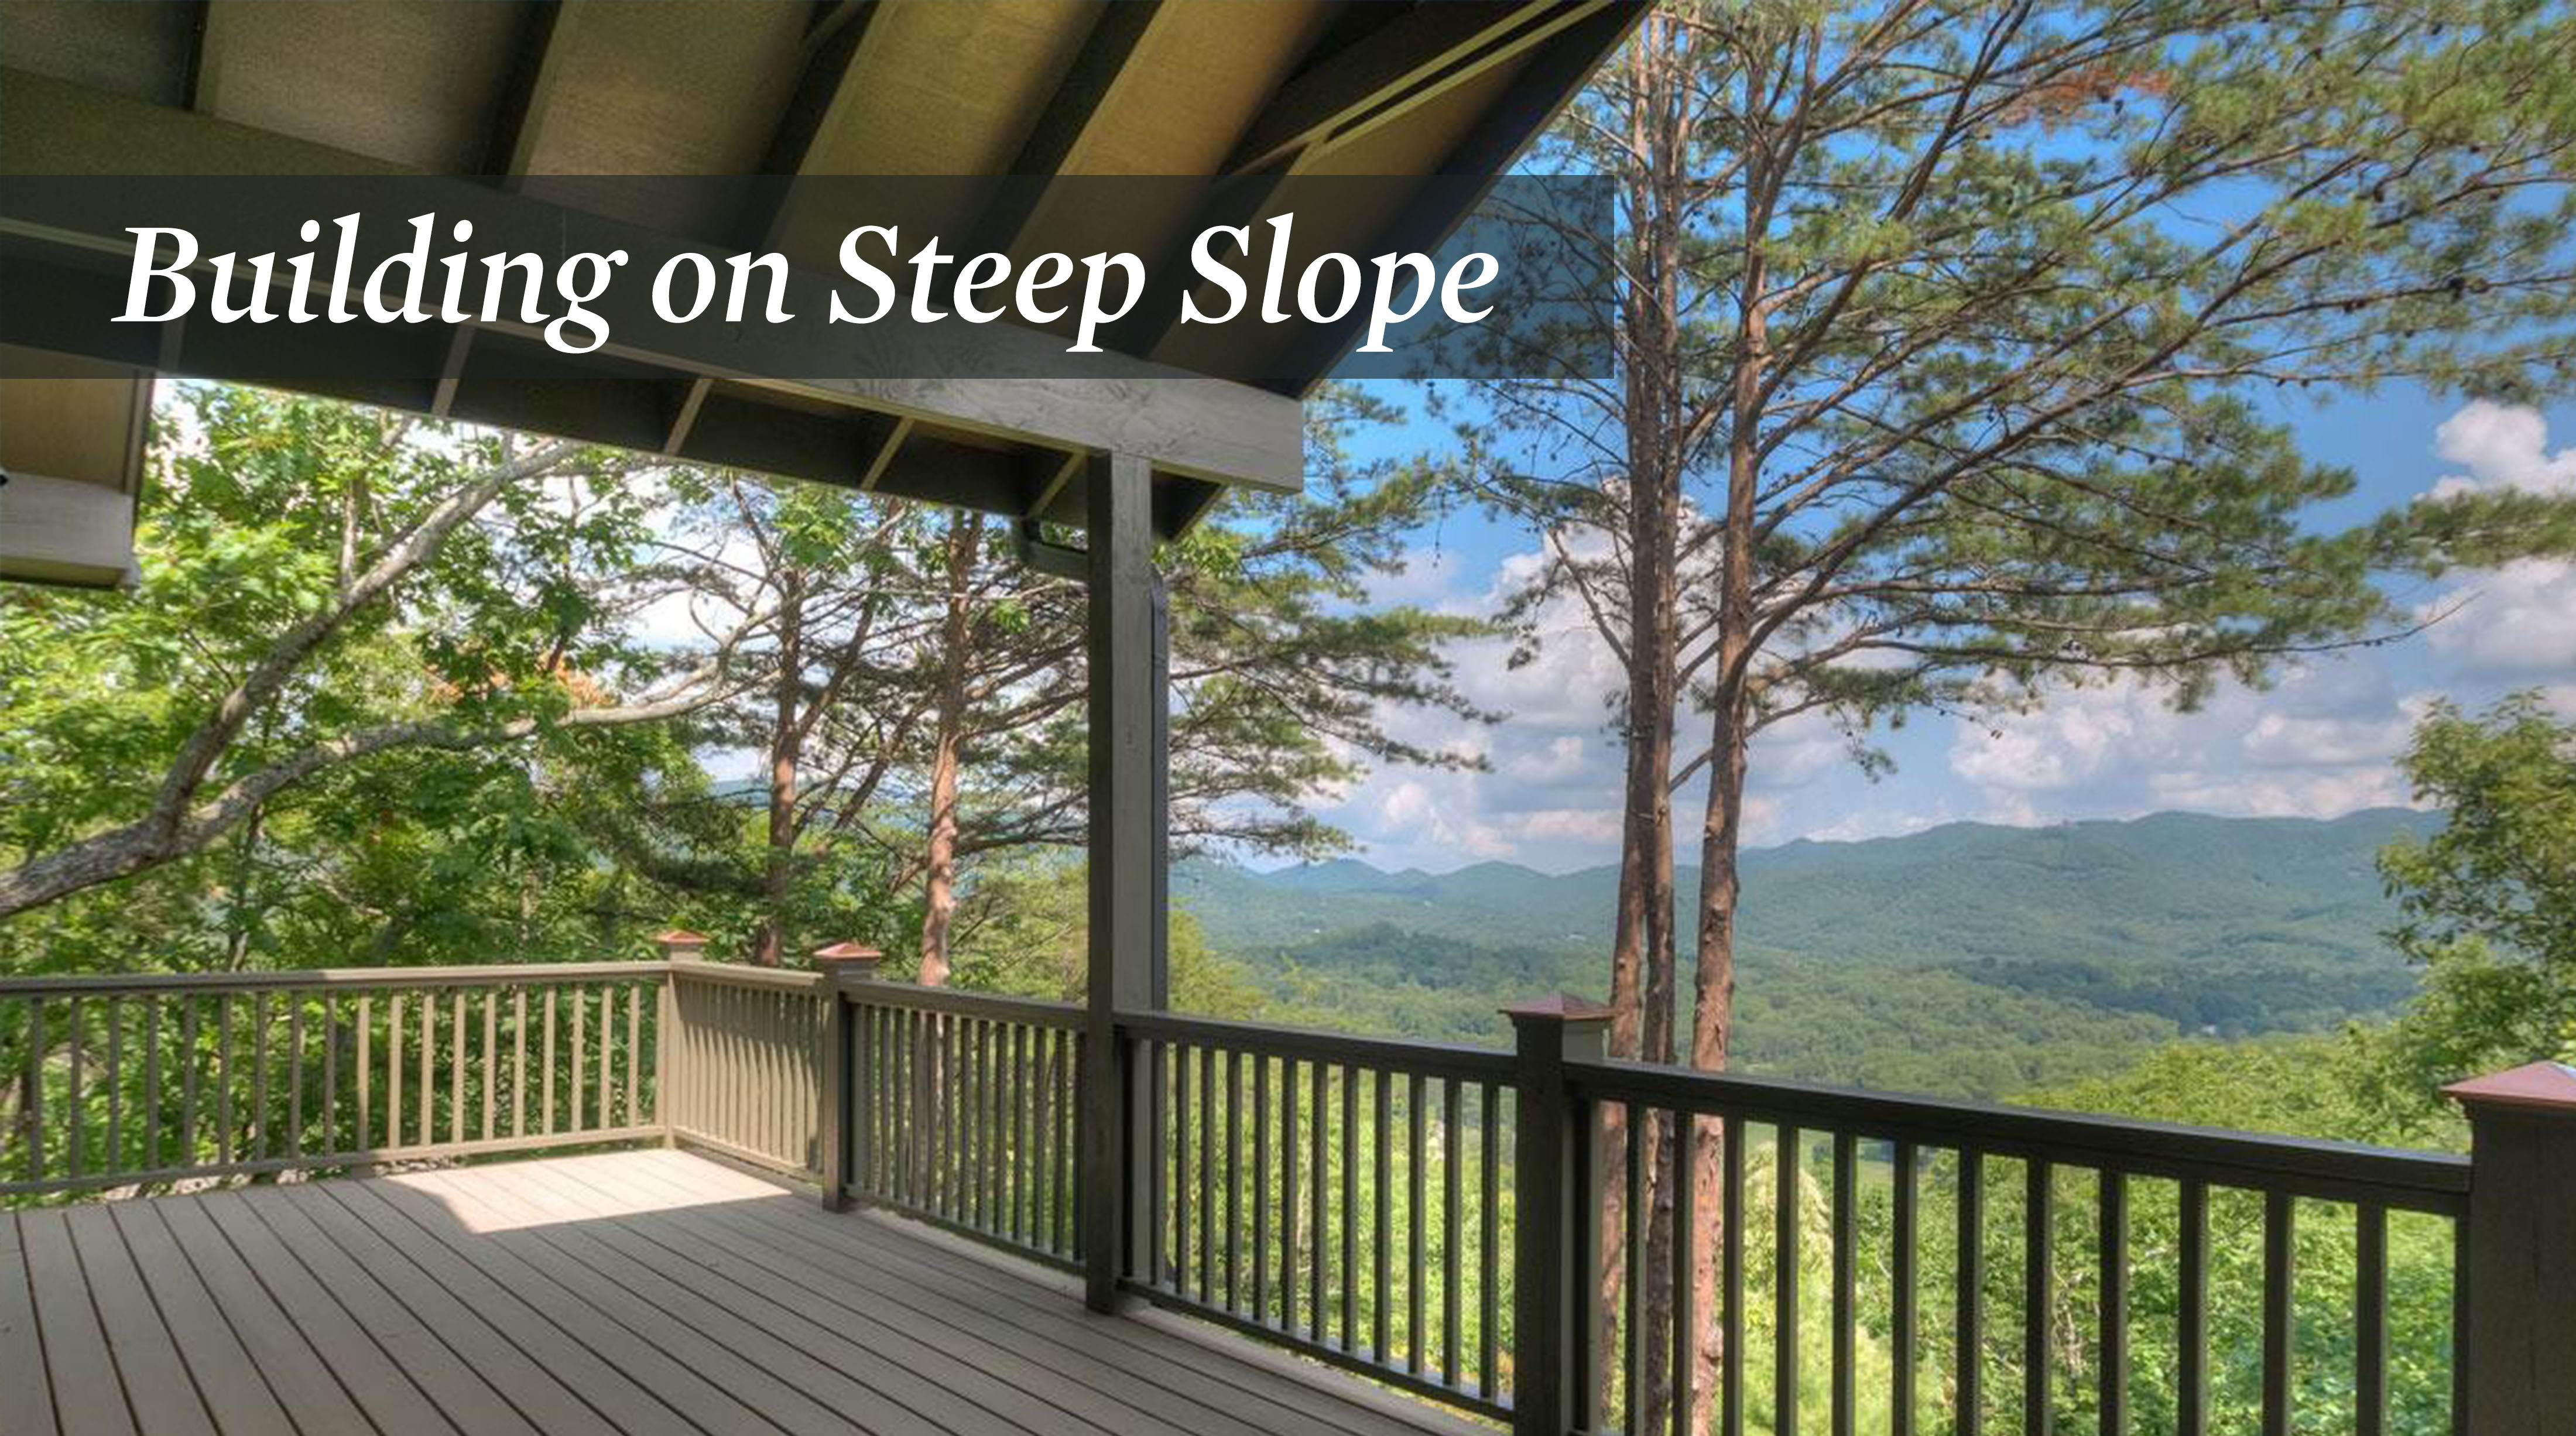 What to Consider Before Building on a Steep Slope